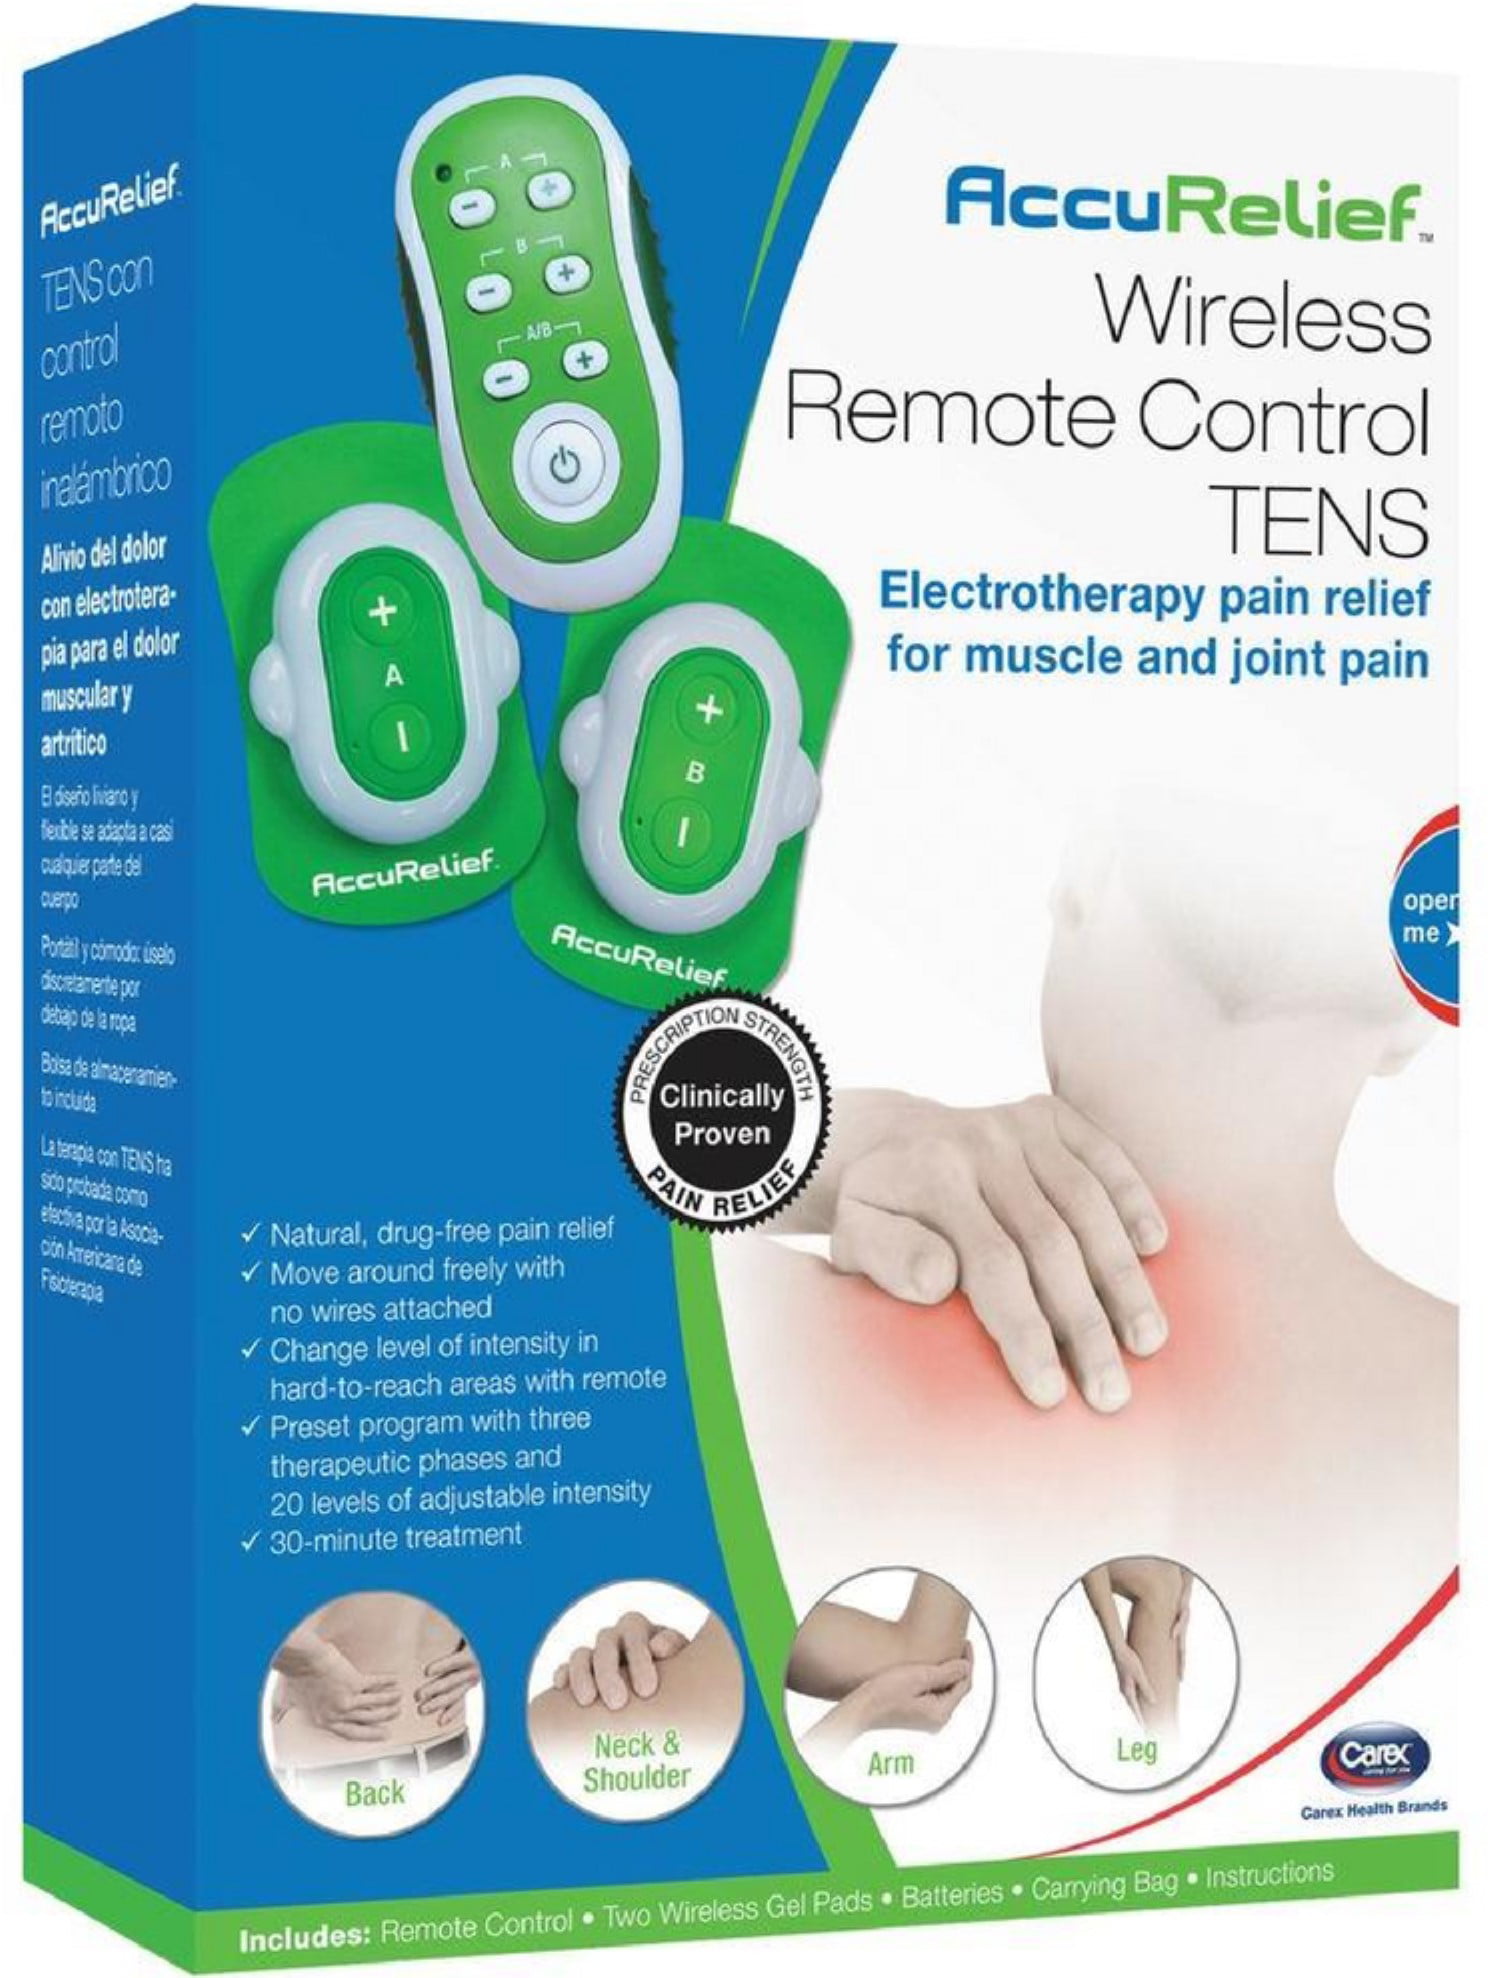 AccuRelief Wireless TENS Electrotherapy Pain Relief System